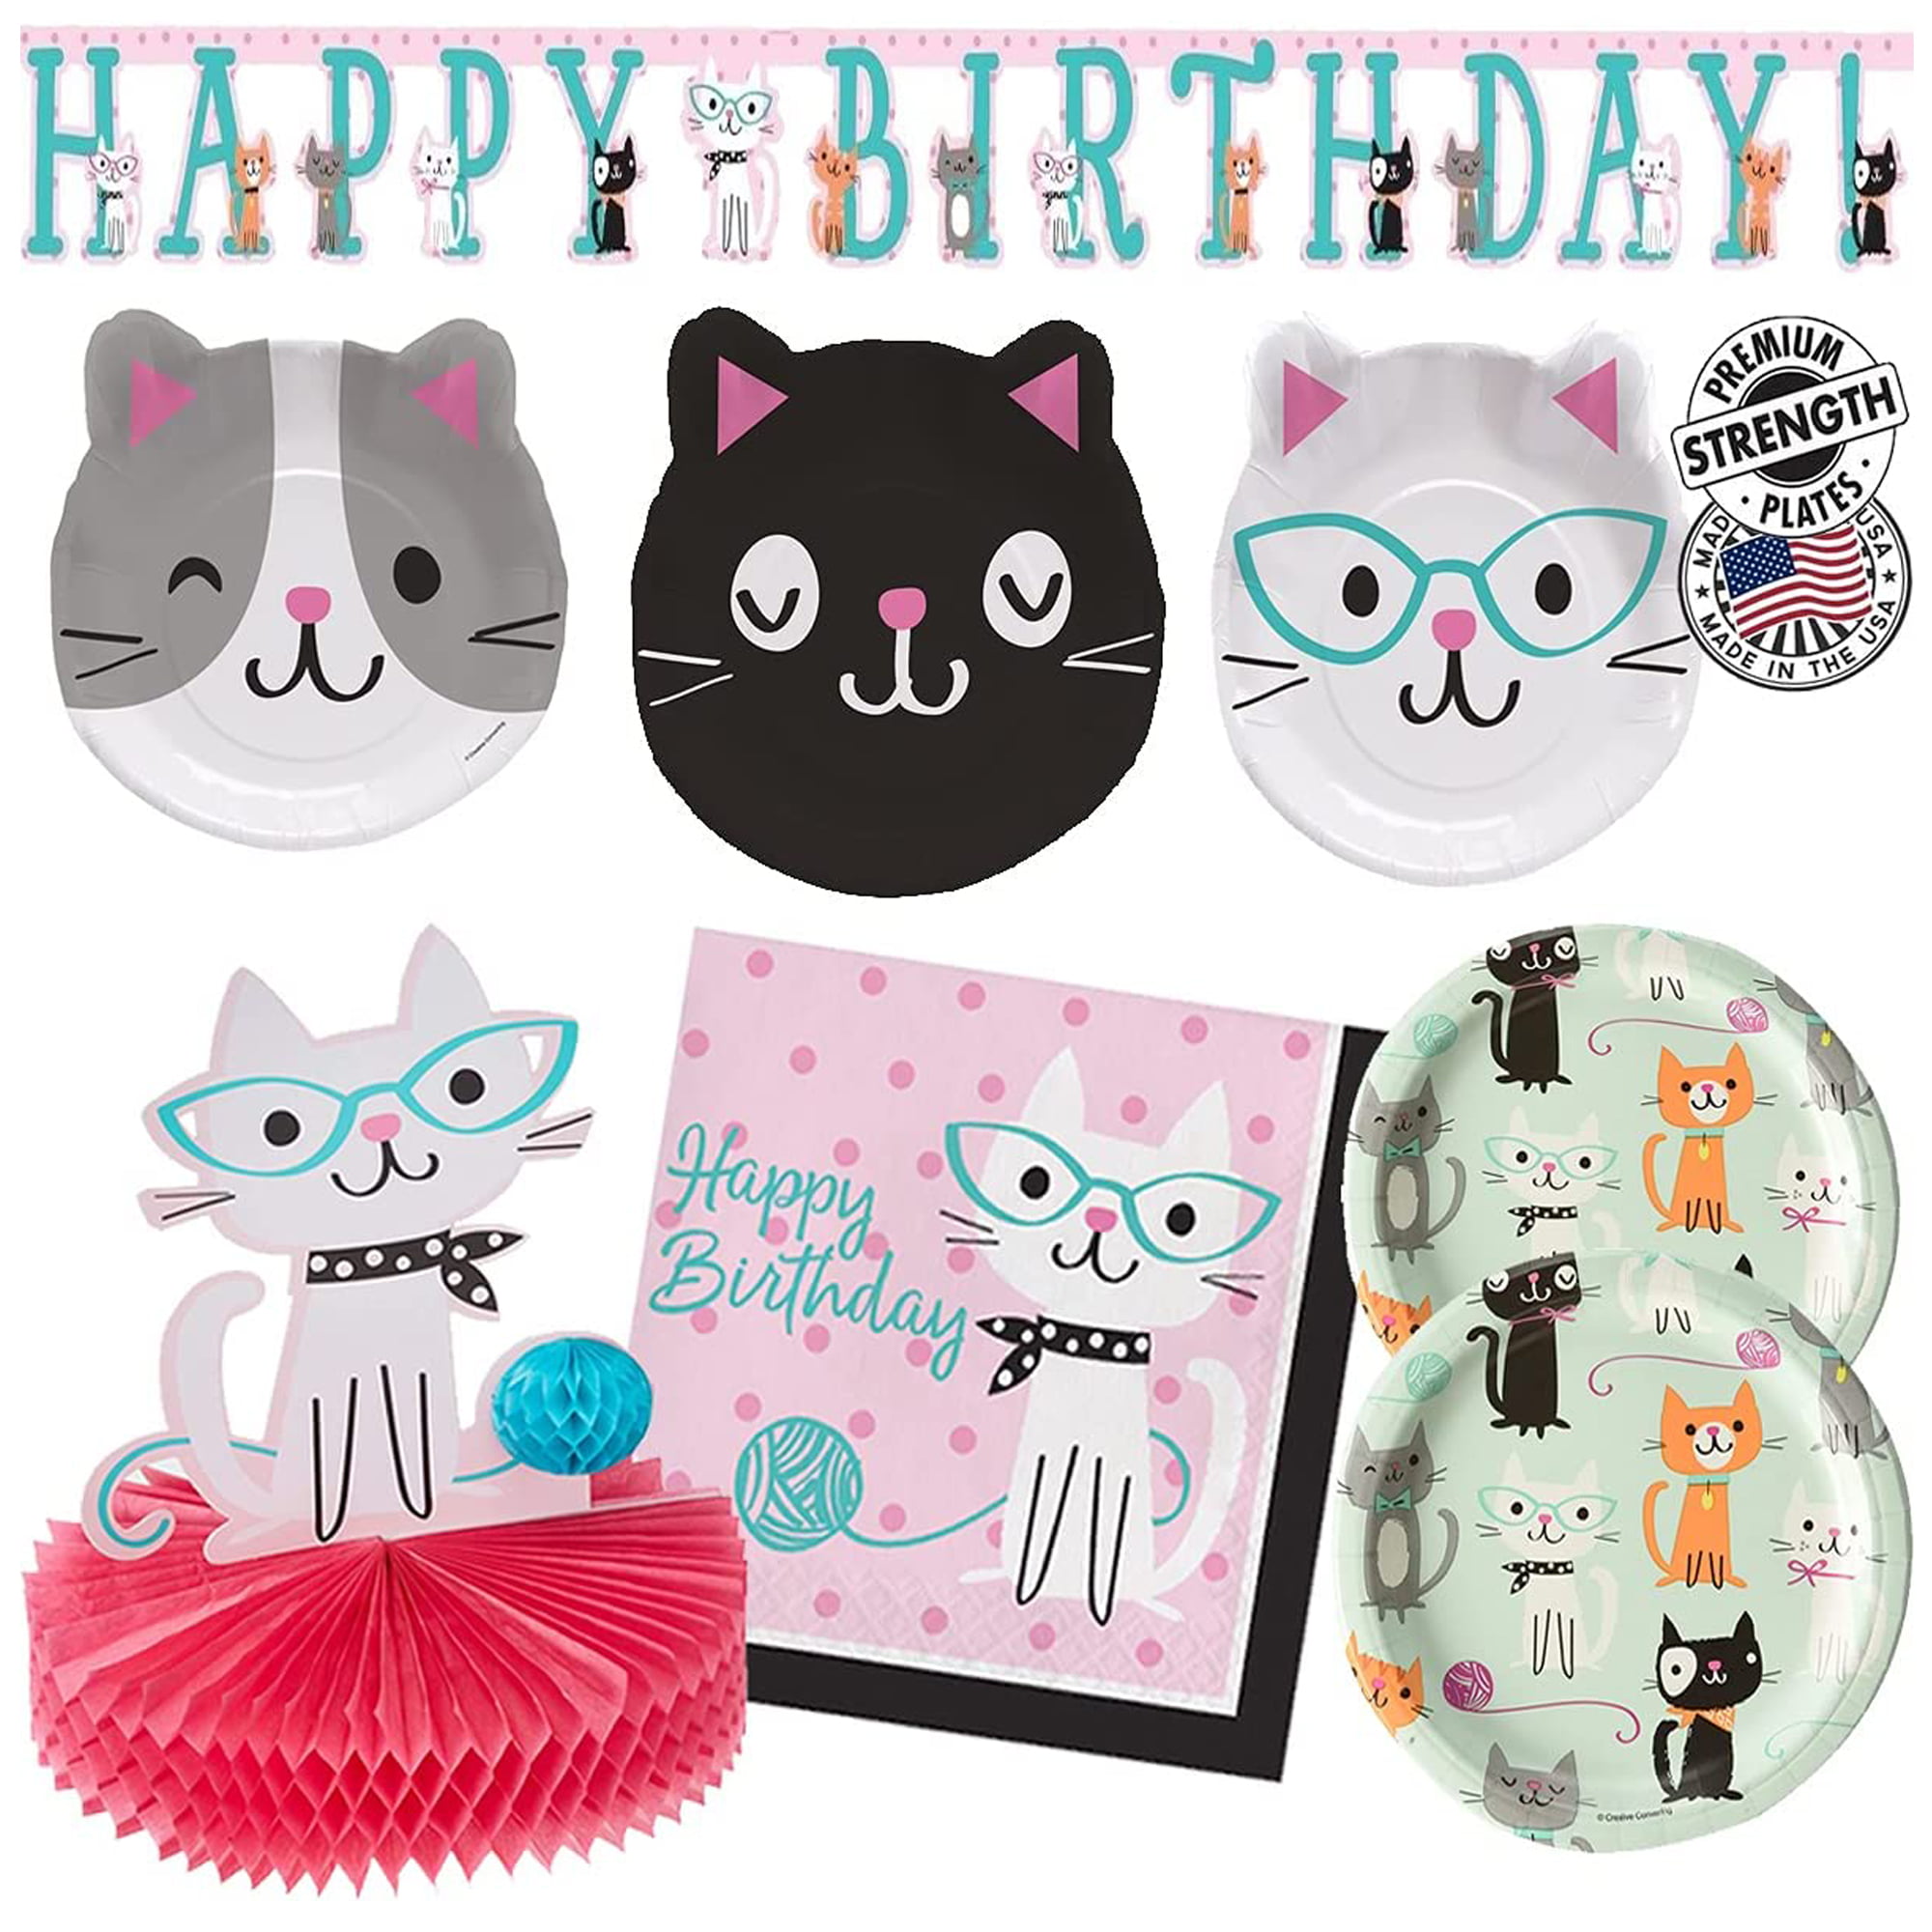 PURRFECT Party Birthday Party Plates and Napkins Cat Themed Party Decorations 